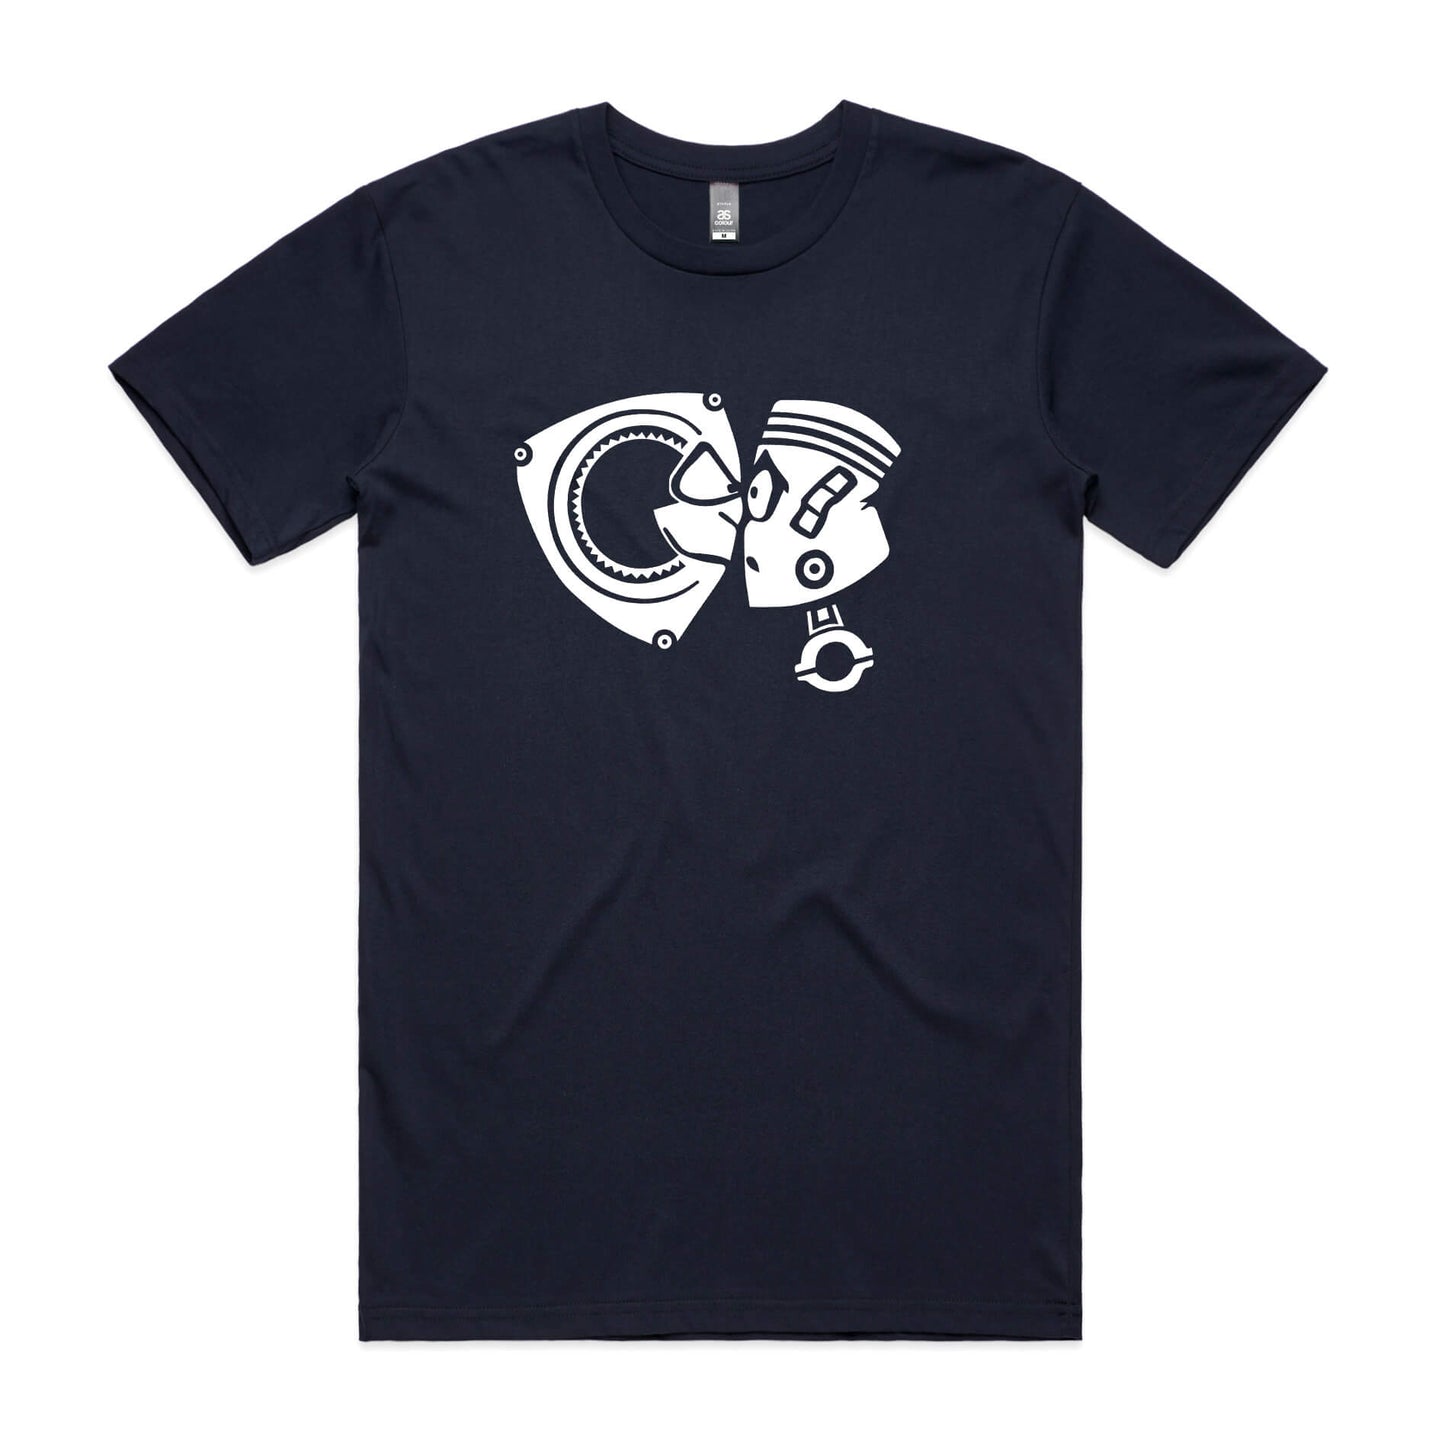 Rotary vs piston t-shirt in navy blue with white cartoon graphic